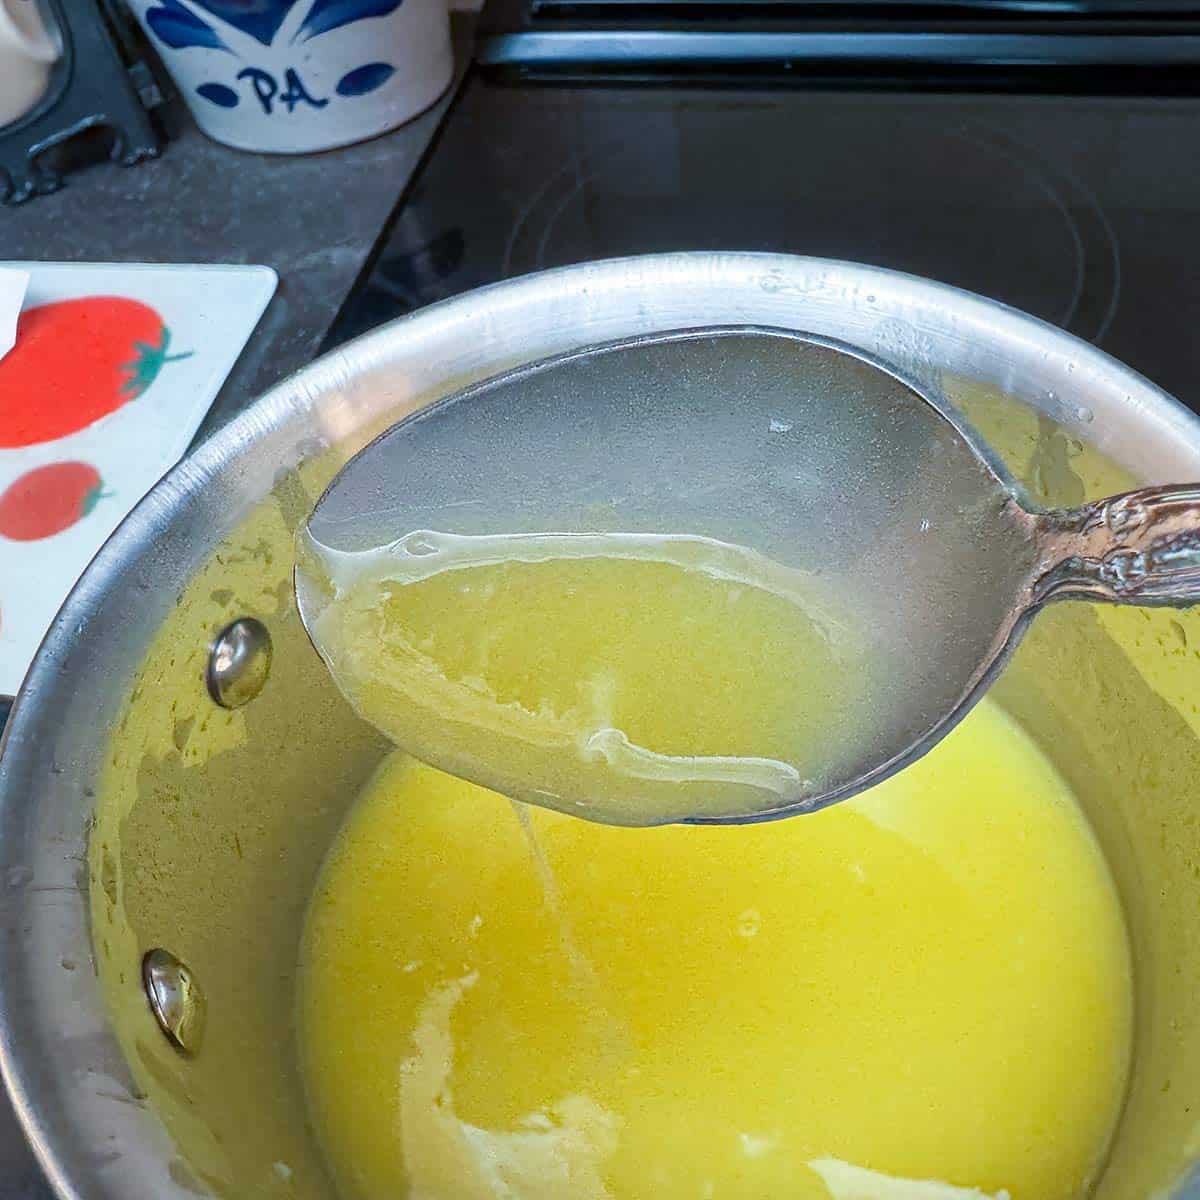 Lemon curd thickened after cooking on the stove in a saucepan.